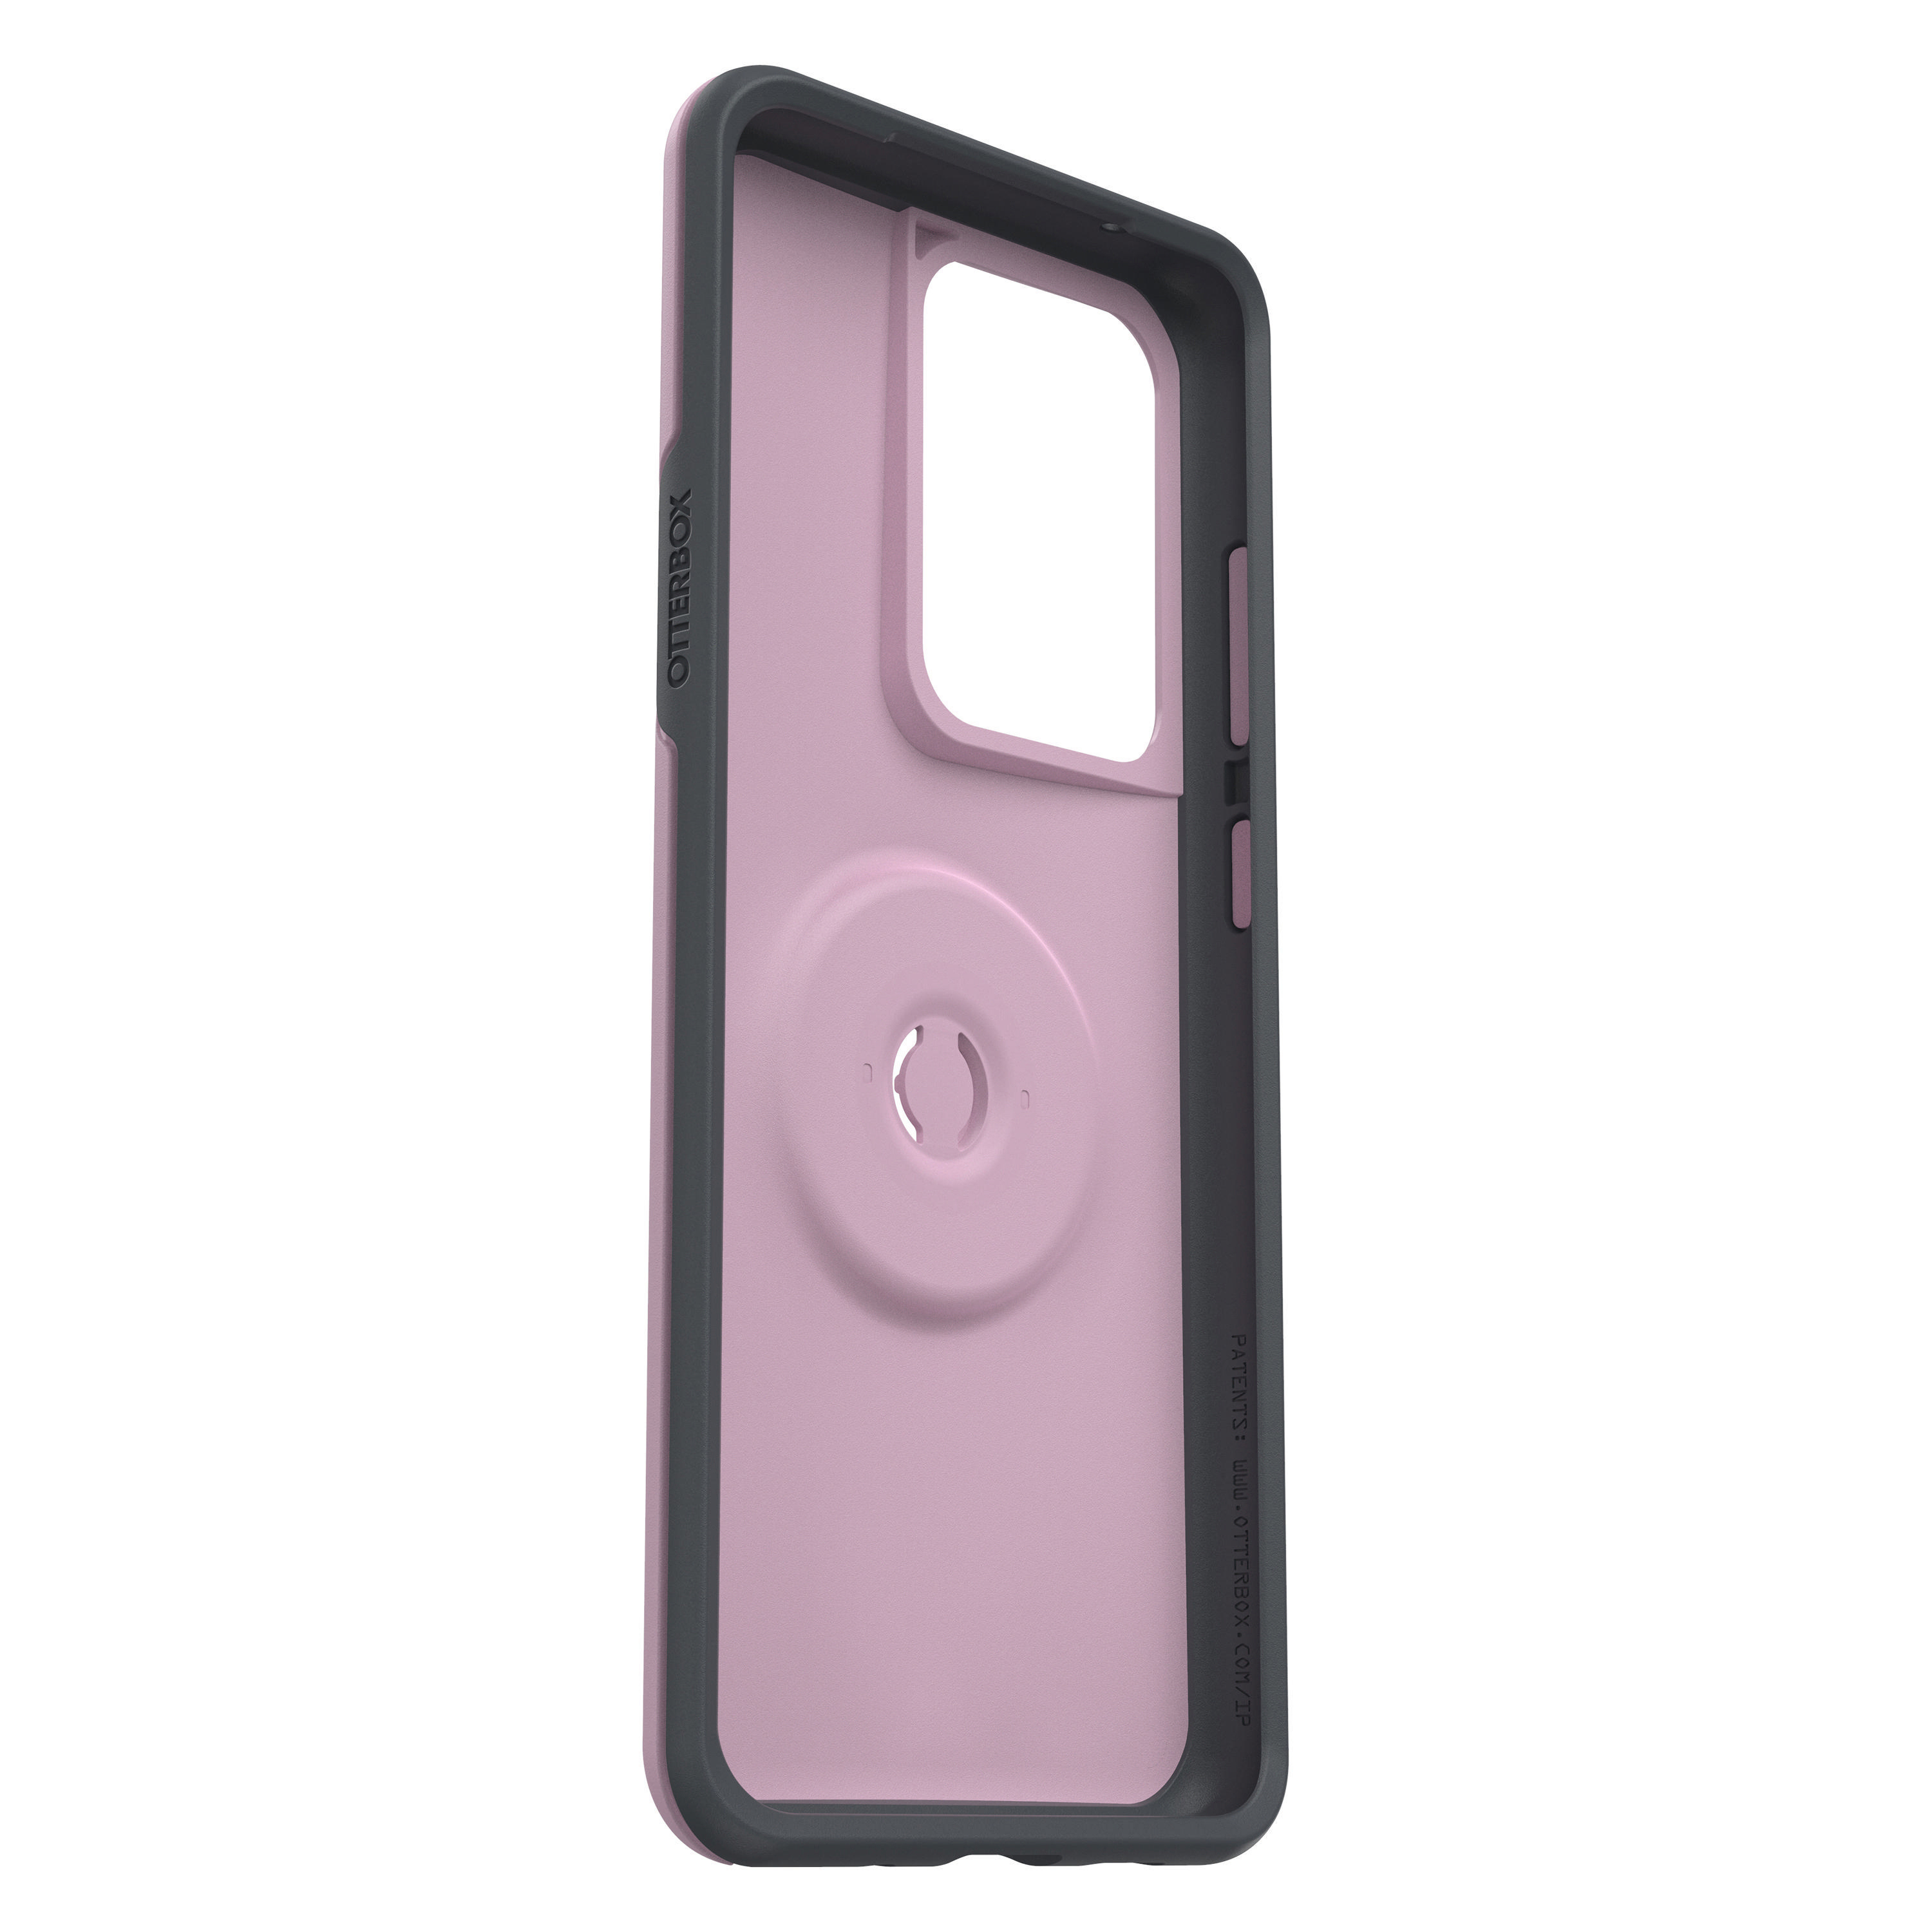 OTTERBOX 77-64239, Backcover, Samsung, Pink Galaxy S20 Ultra